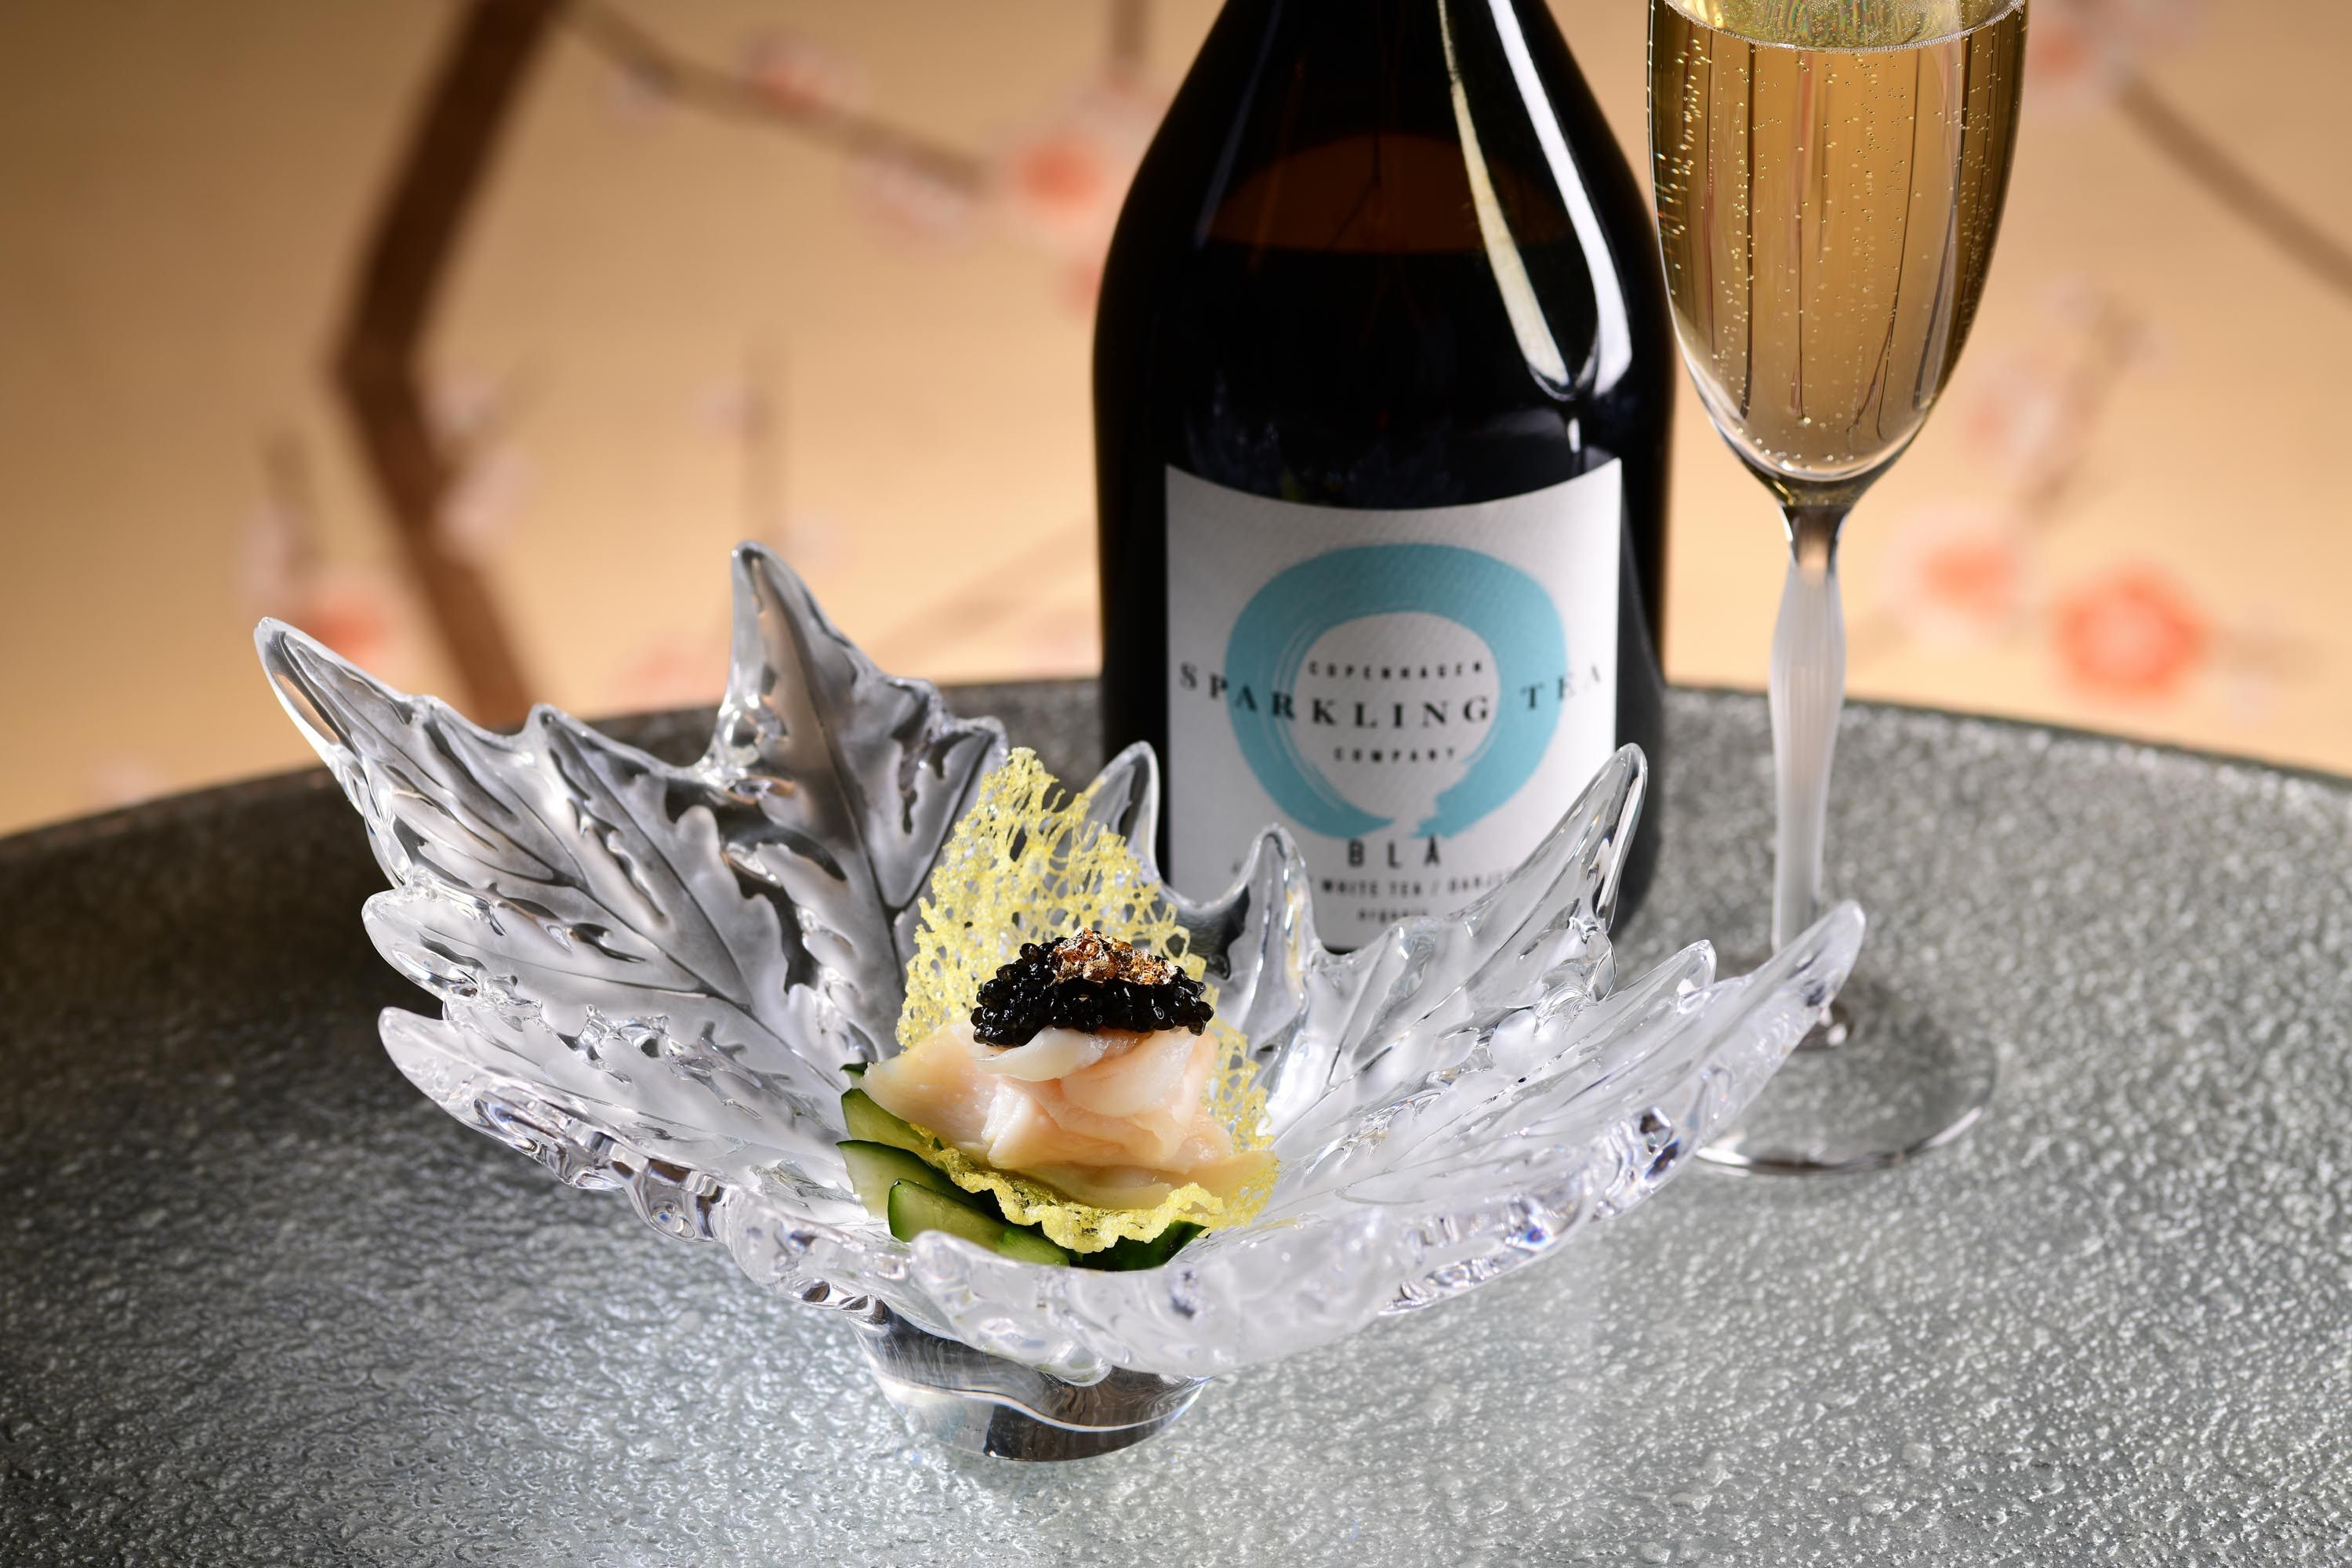 Drunken razor clam, Shaoxing rice wine, simmered, topped with caviar – one of the seasonal lifestyle treats and experiences on offer this month. Photo: Ming Court